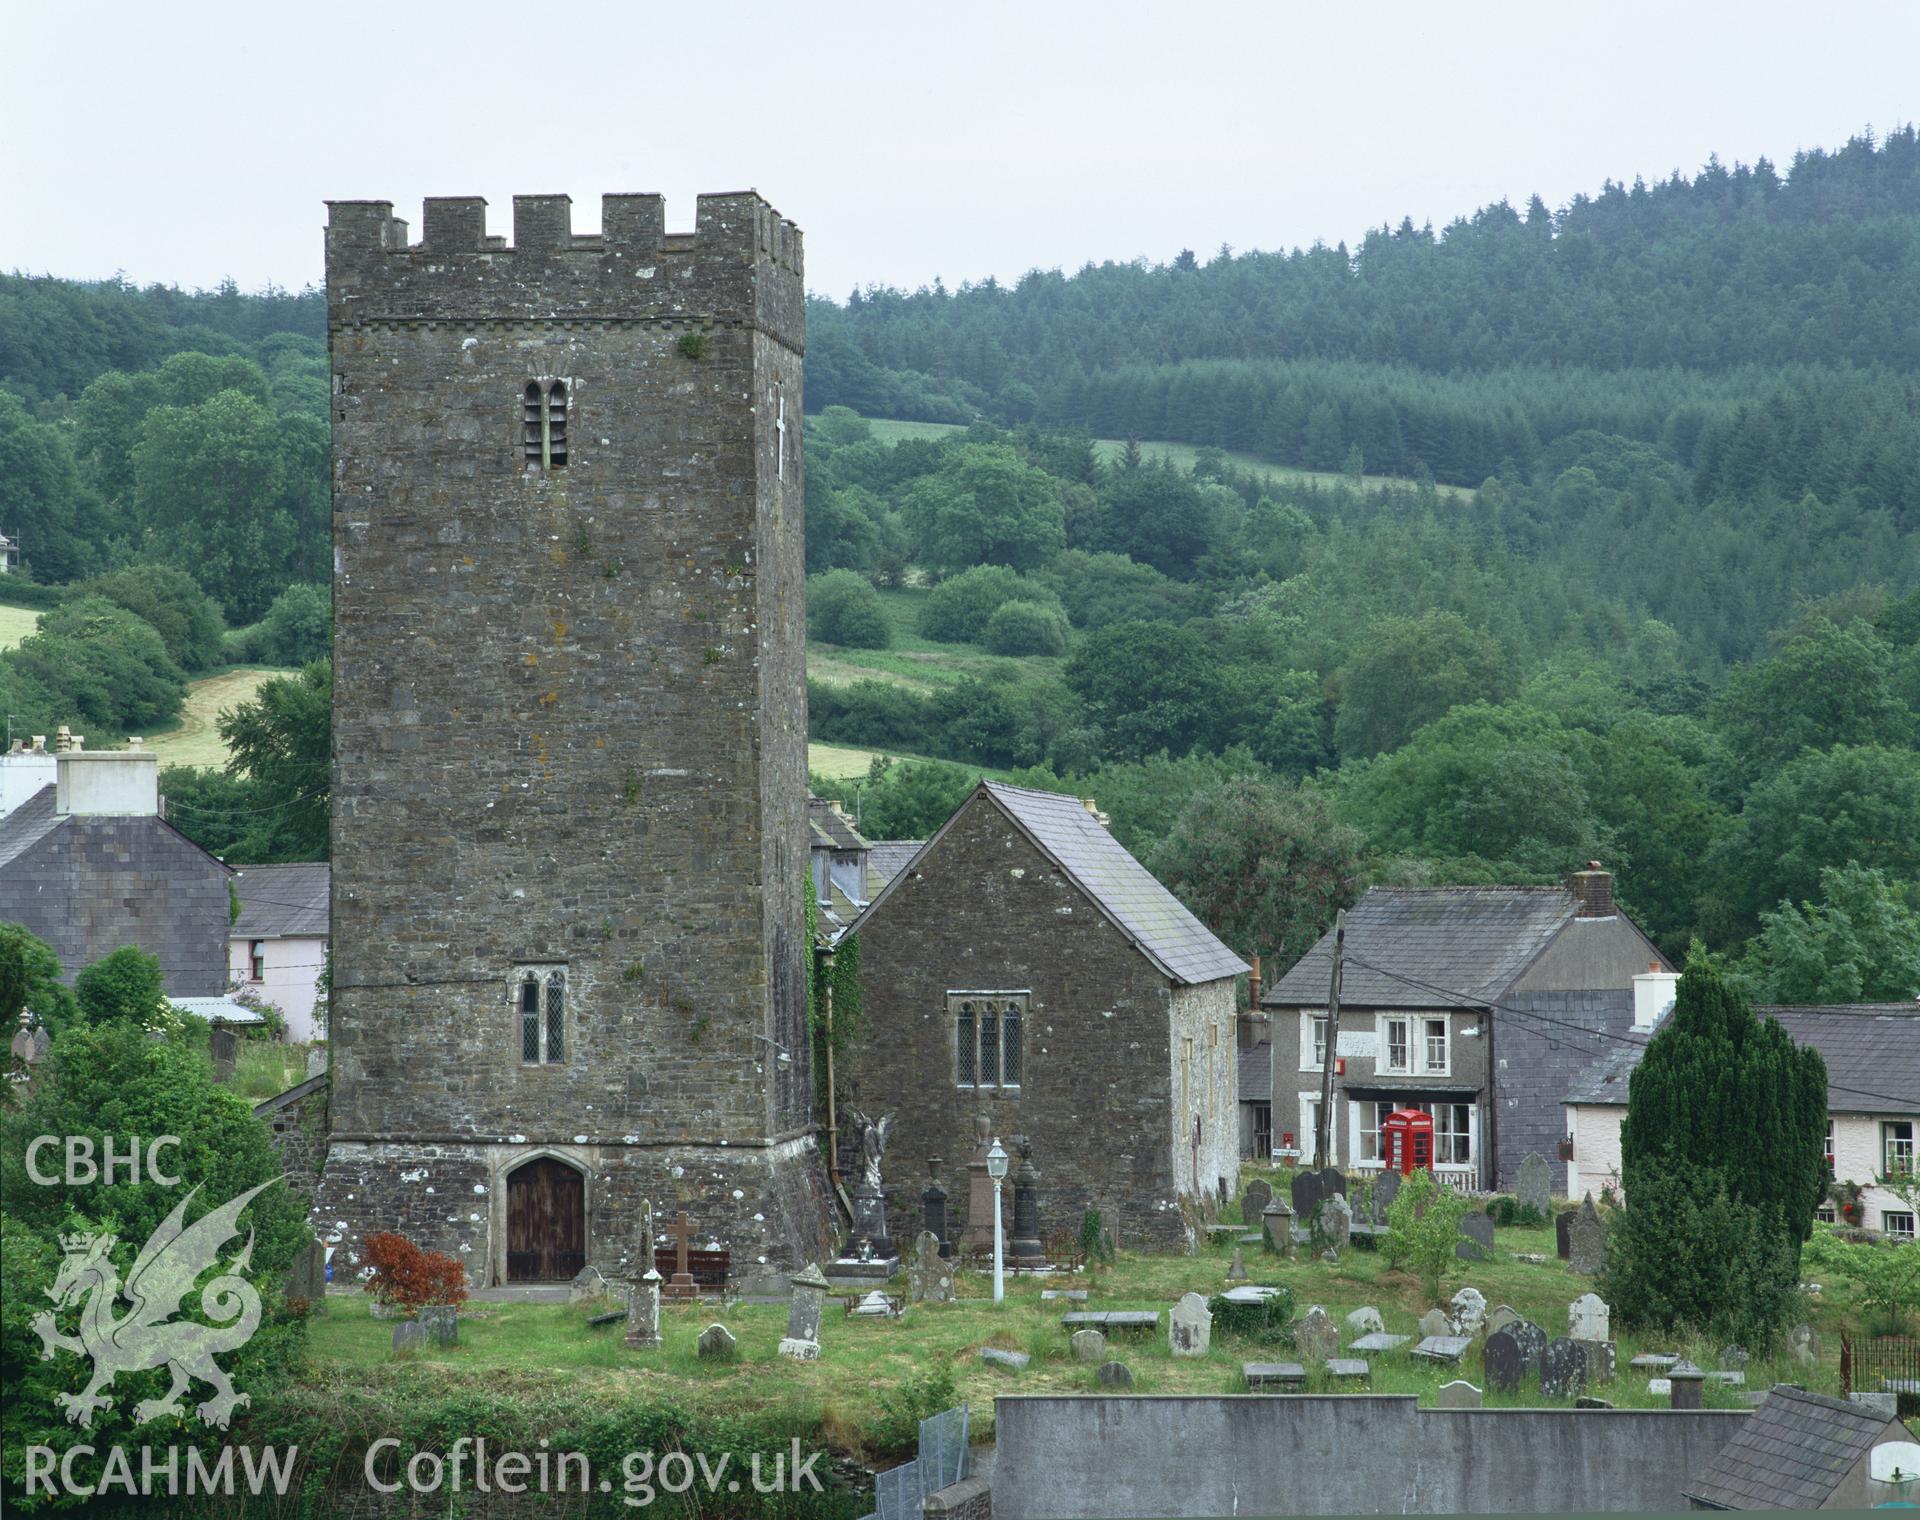 Colour transparency showing view of St Cynwyl's Church, Cynwyl Gaeo, produced by Iain Wright, June 2004.